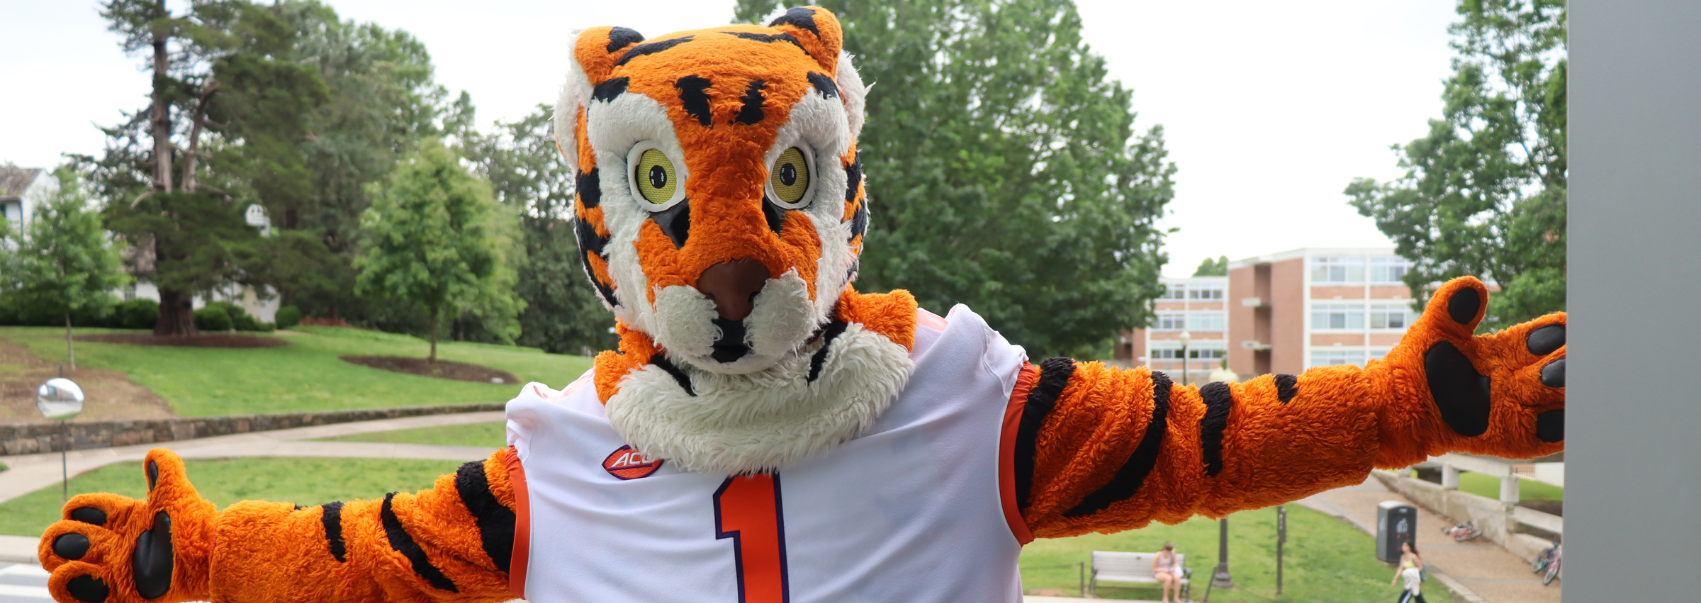 The Clemson Tiger Mascot standing with arms outstretched in front of the Shoebox community